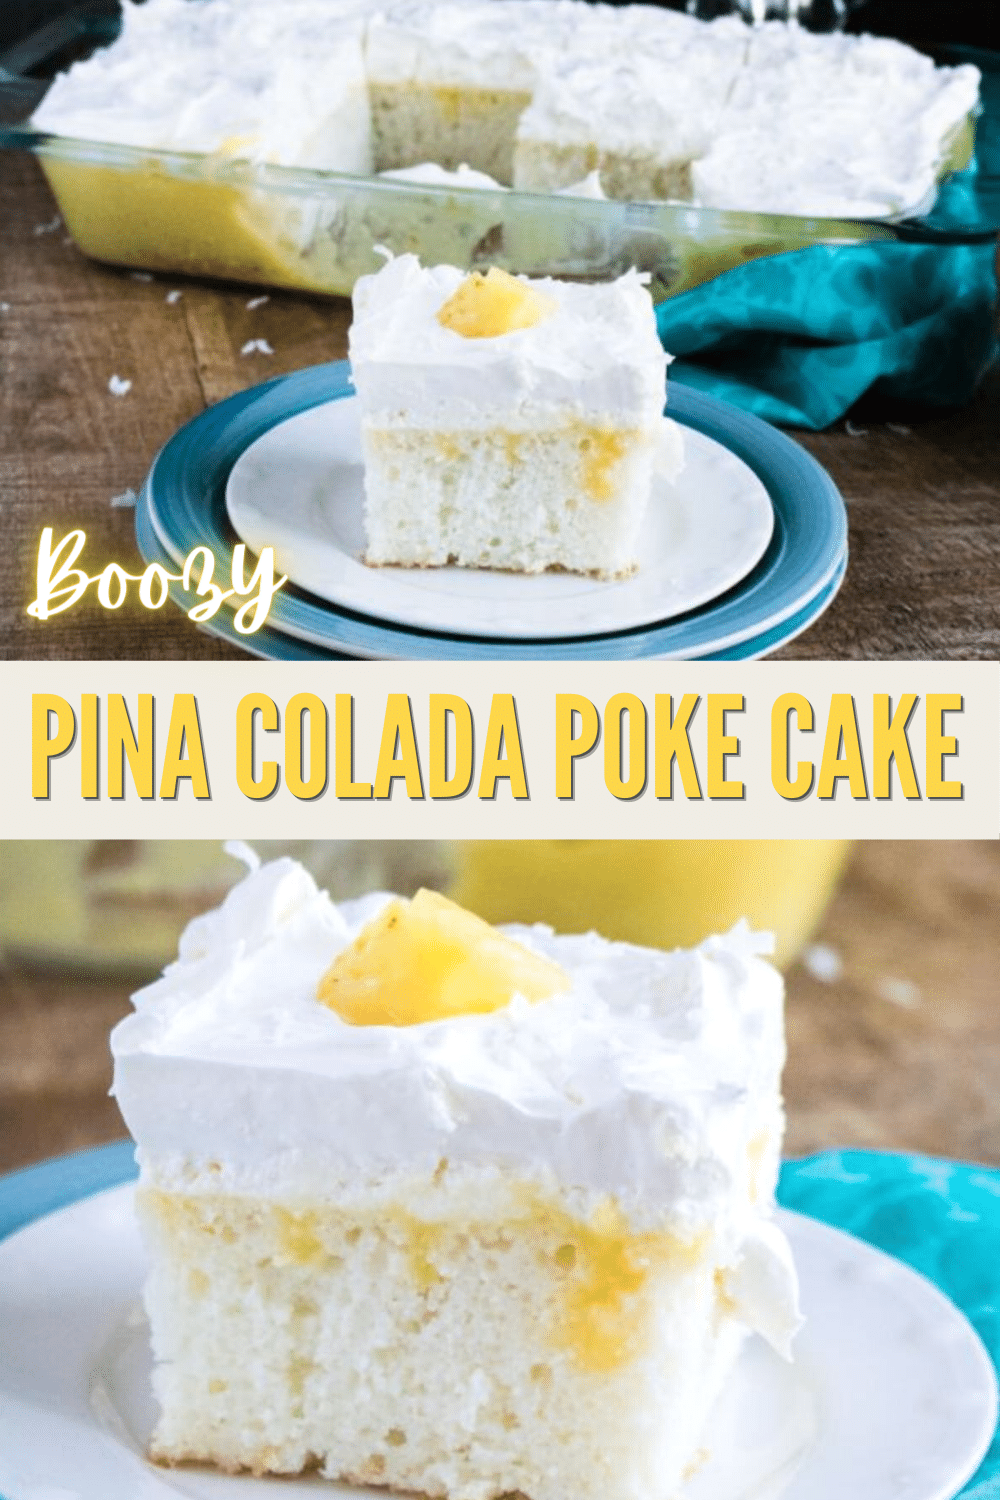 a collage of 2 images of Pina Colada Poke Cake, top part shows a slice with the rest of the cake at the background, bottom part shows a single slice